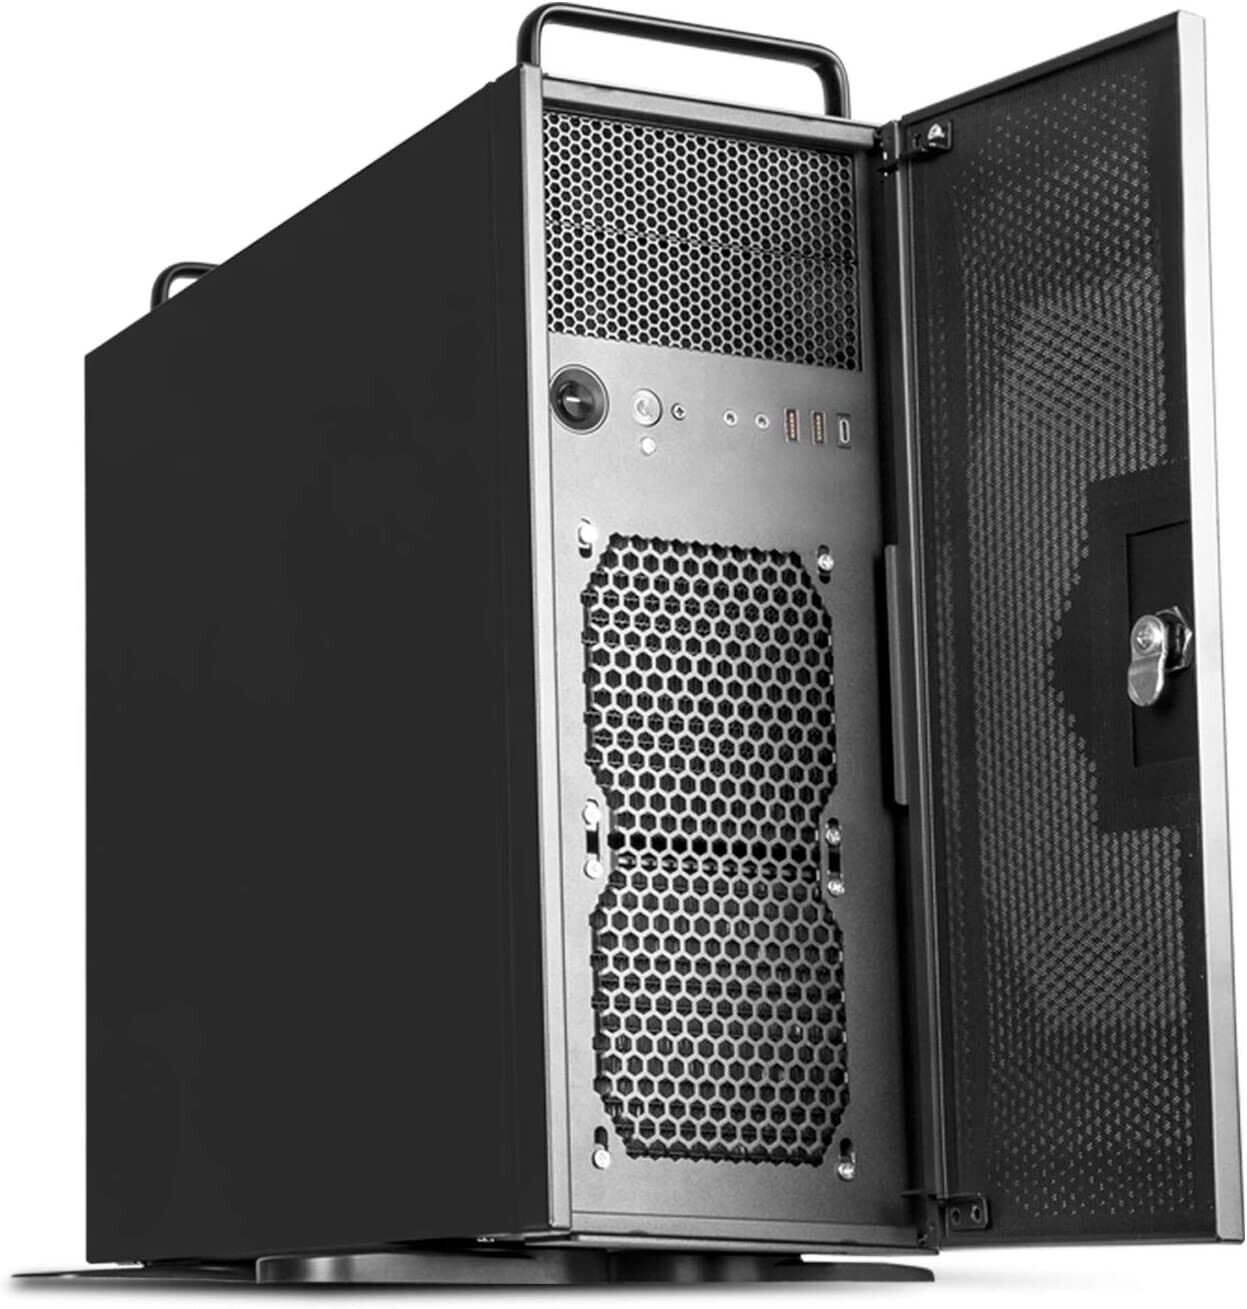 Silverstone RM42-502 4U rackmount Server Chassis with Liquid Cooling